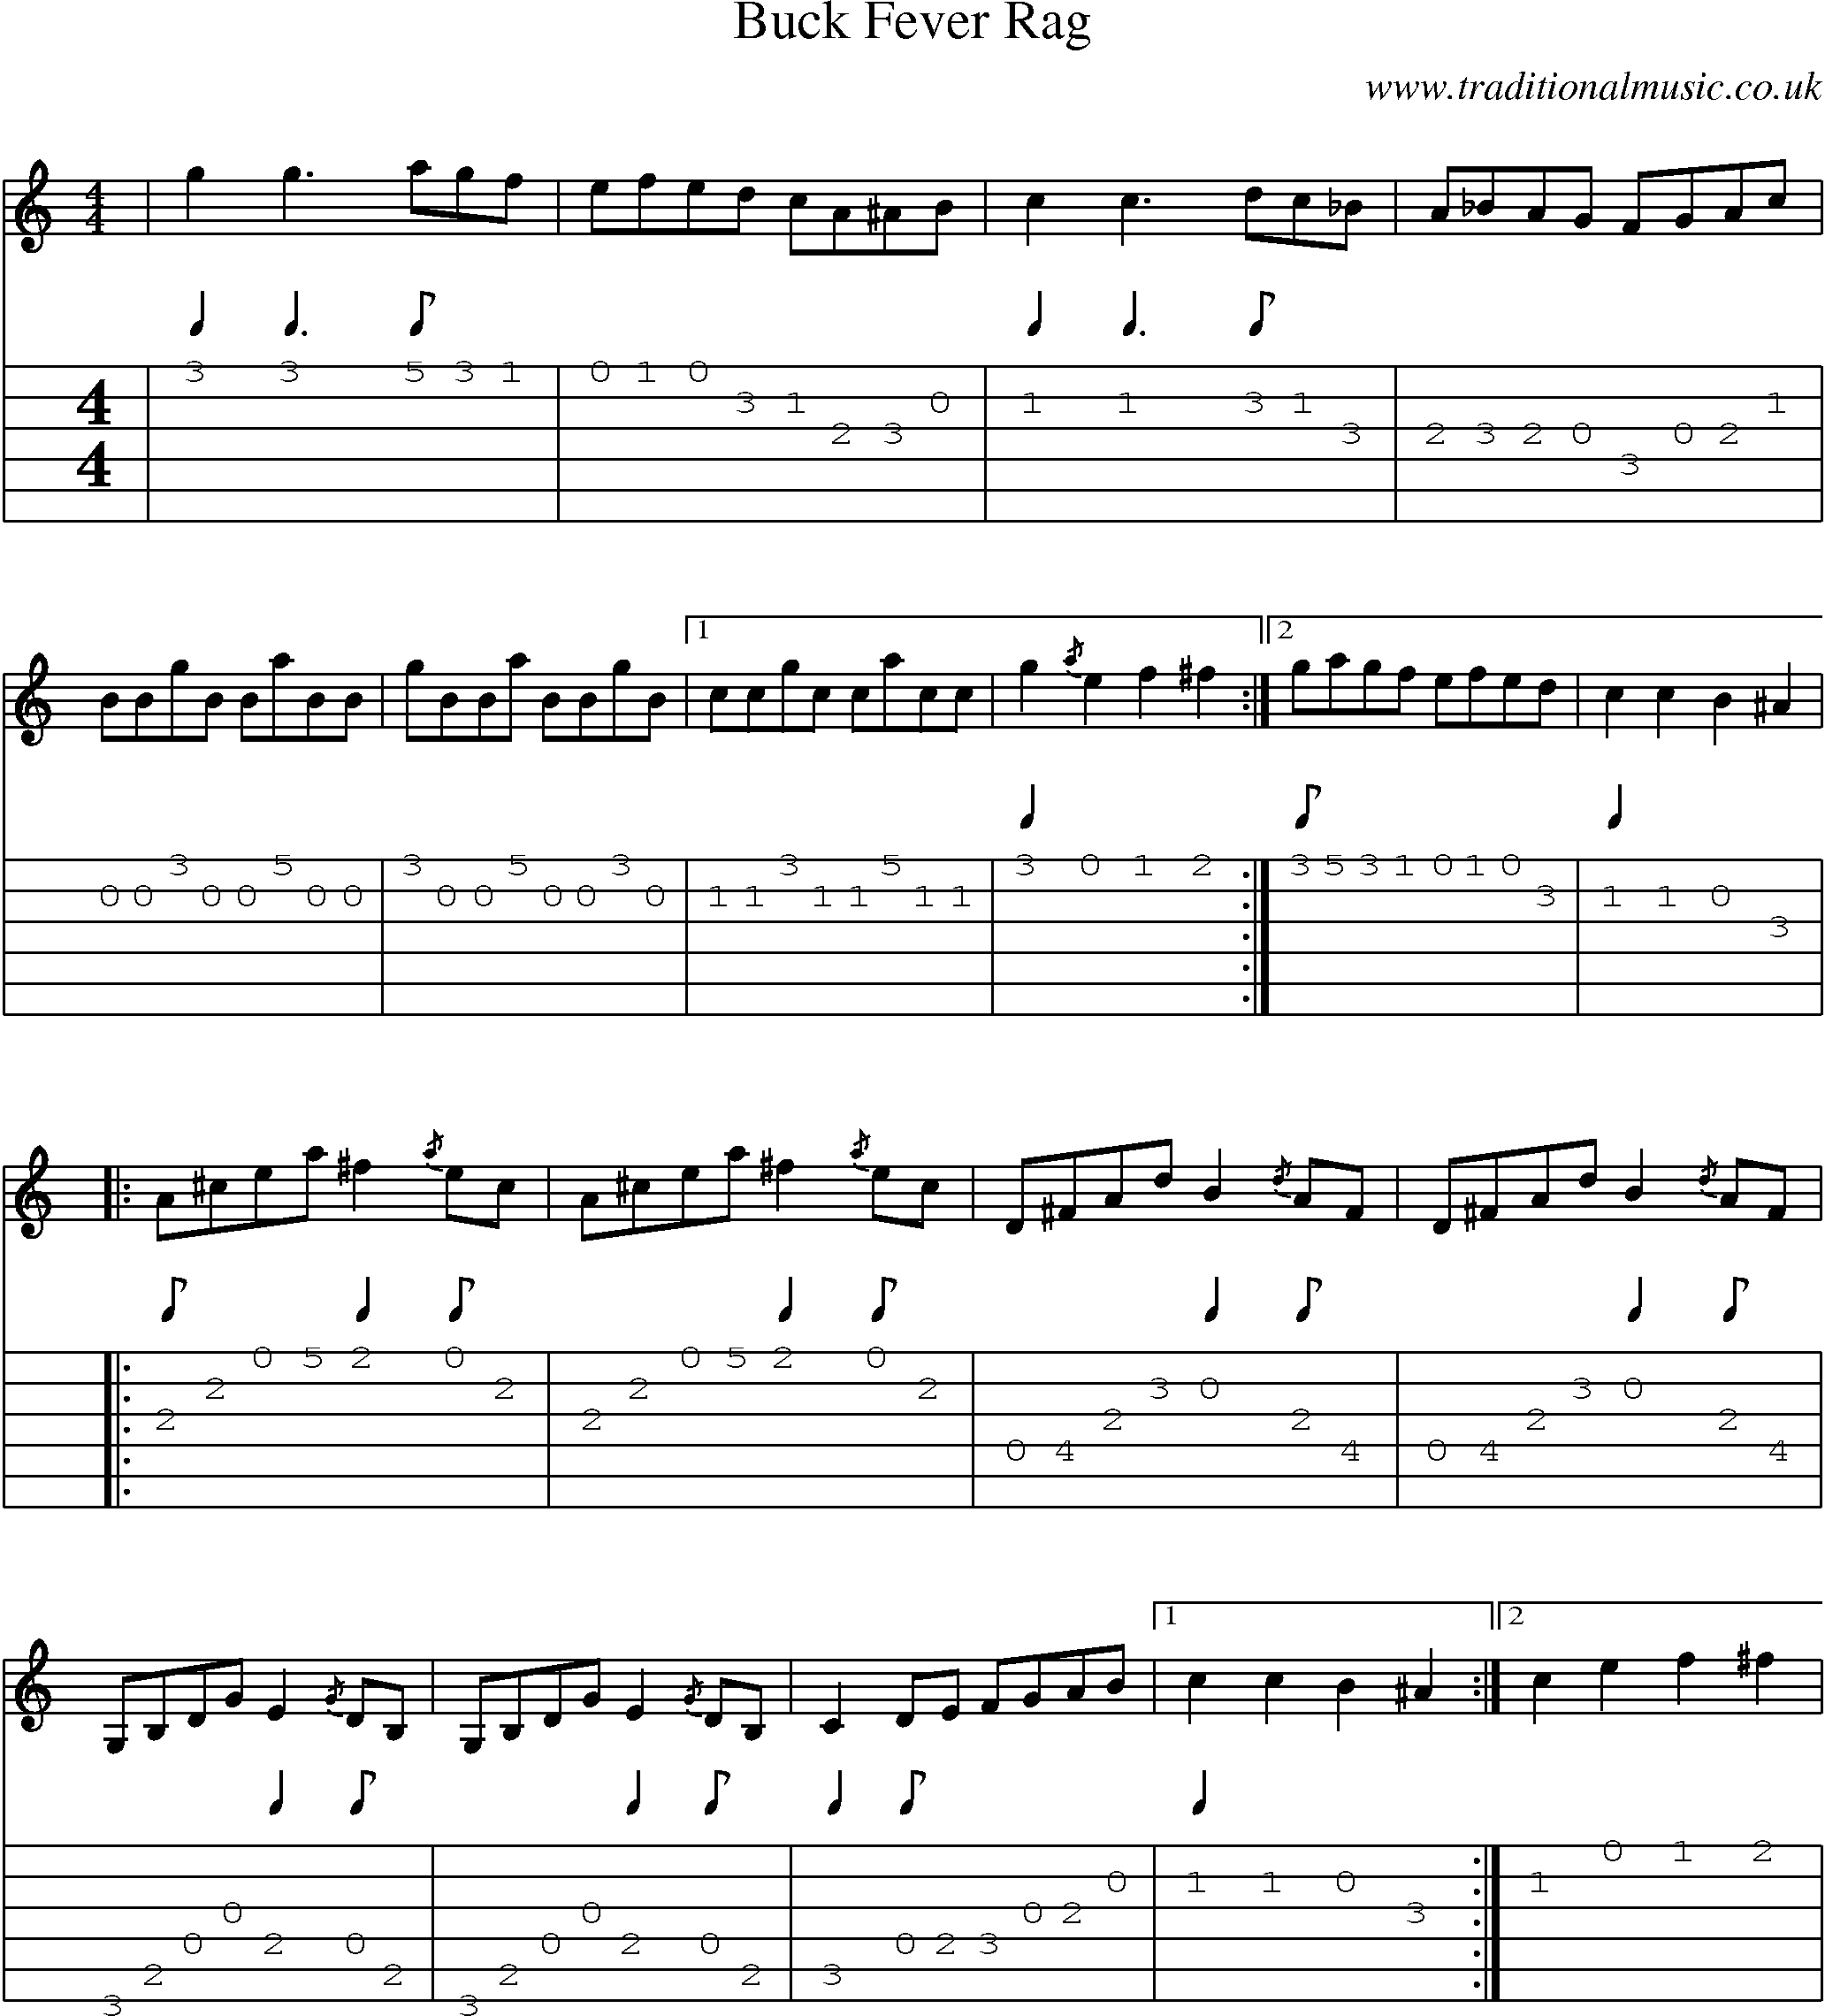 Music Score and Guitar Tabs for Buck Fever Rag